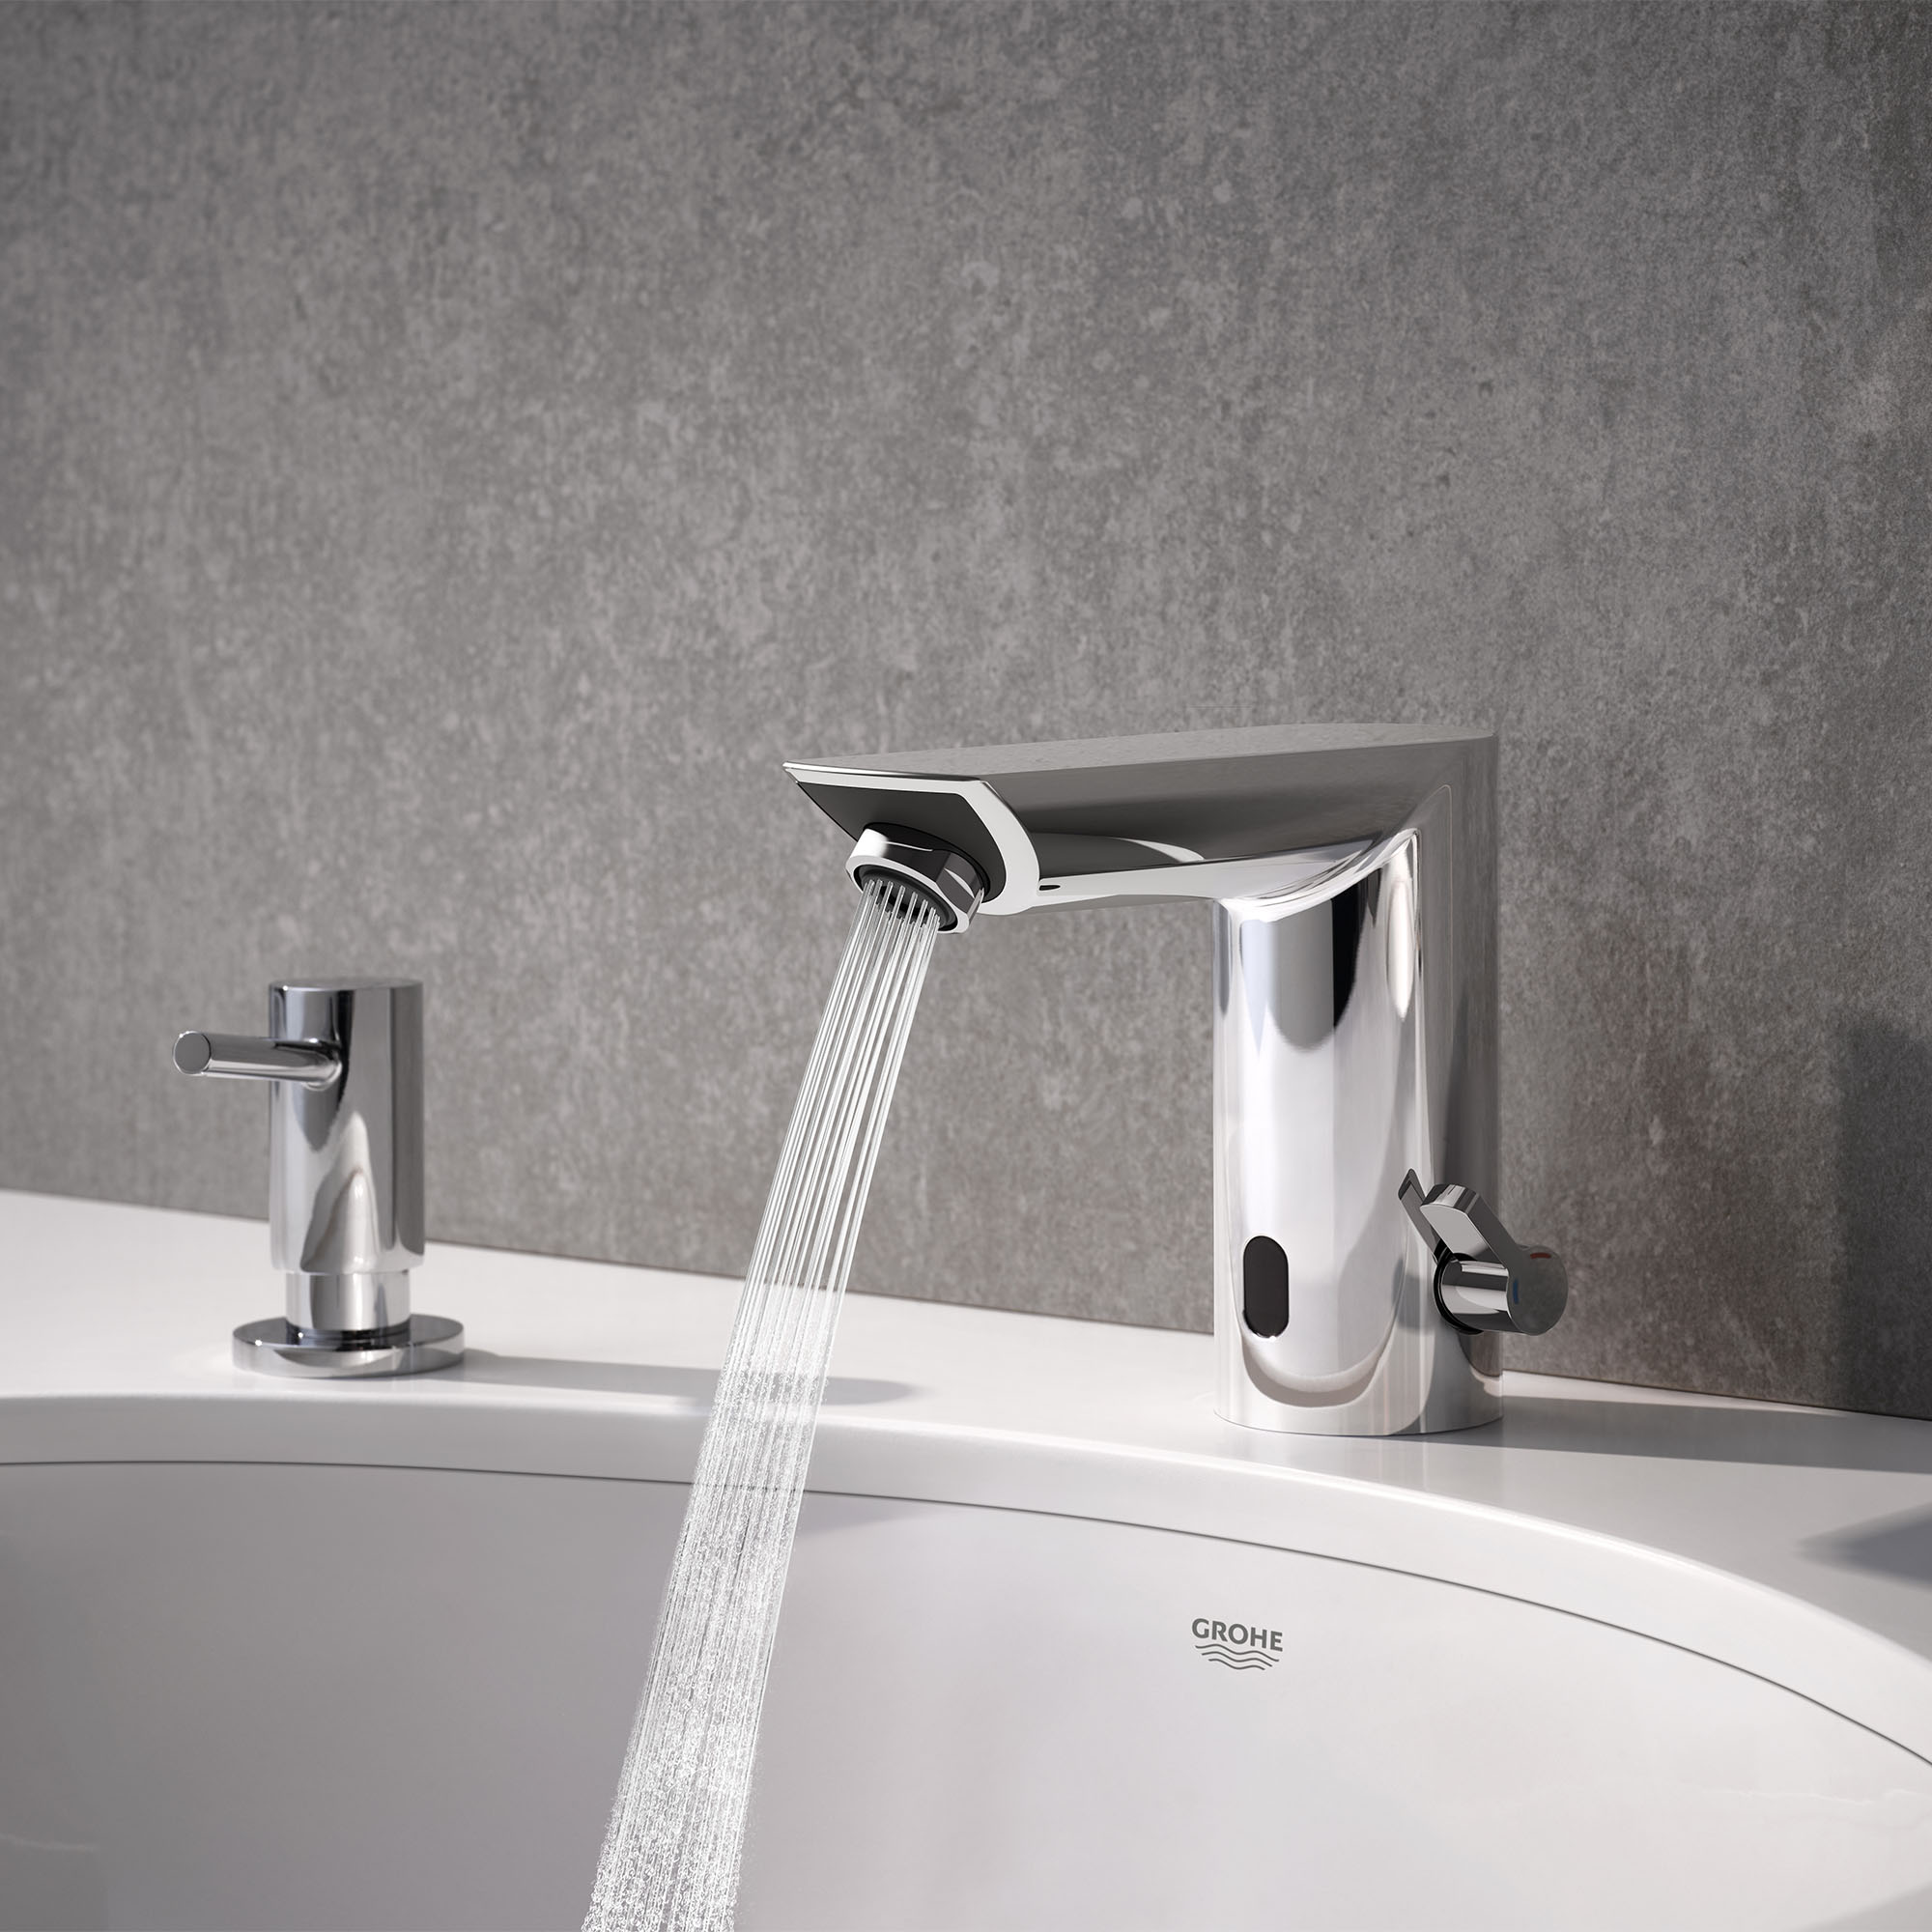 E Touchless Electronic Faucet with Temperature Control Lever, AC-Powered